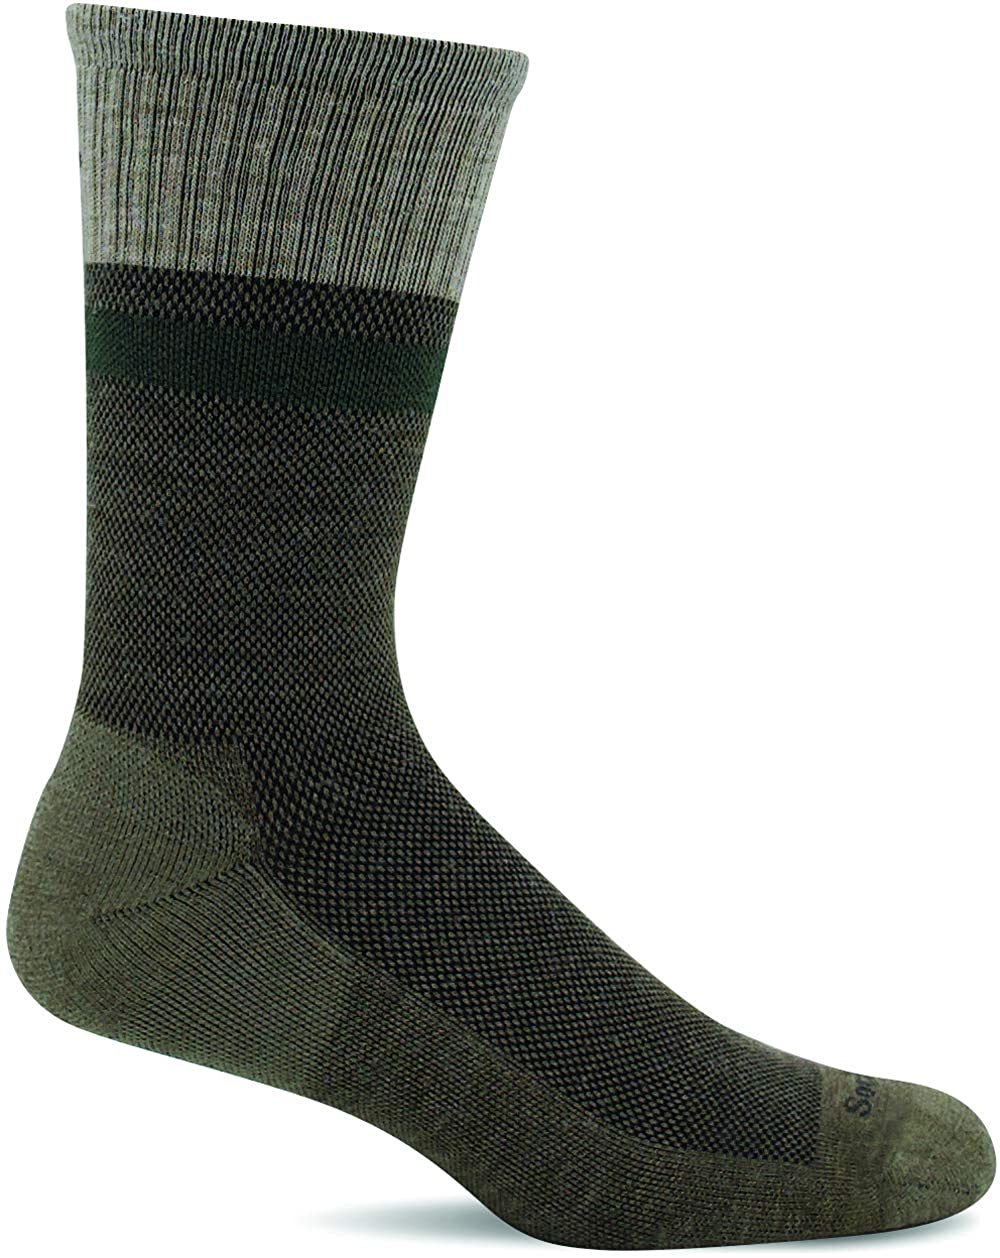 Sockwell Men's Foothold Crew Moderate Graduated Compression Sock in Khaki from the side